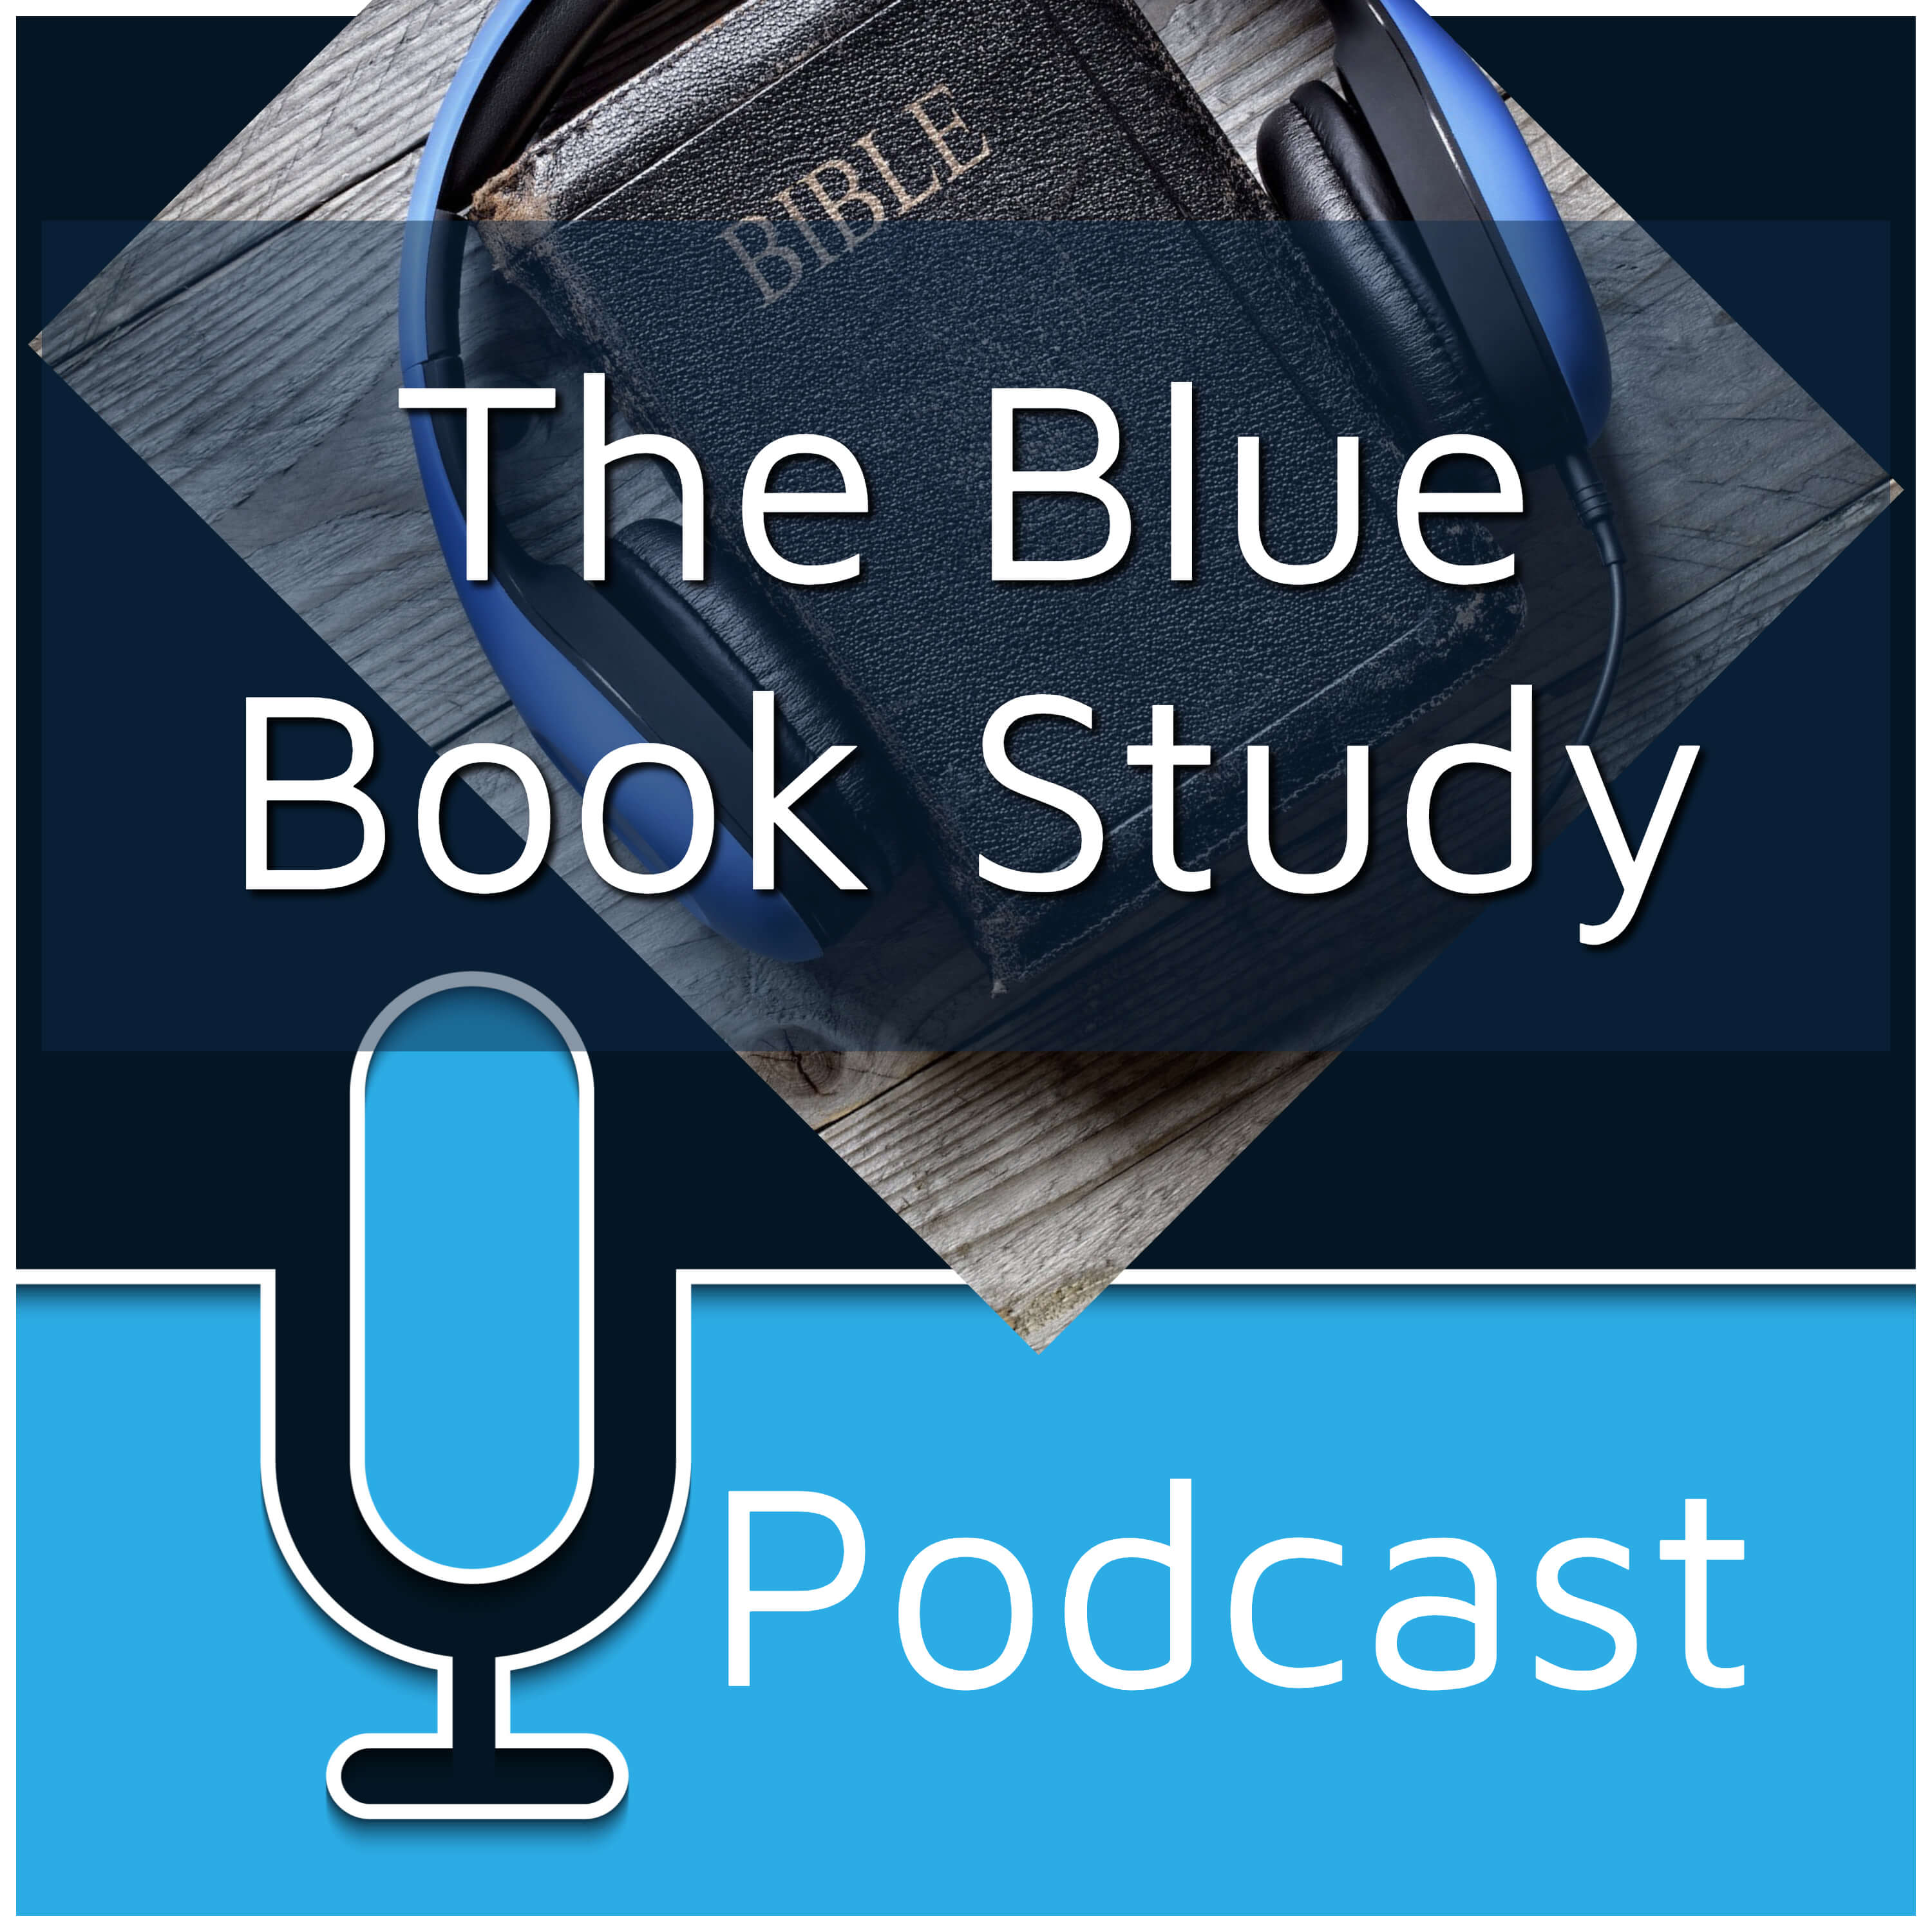 Artwork for podcast The Blue Book Study